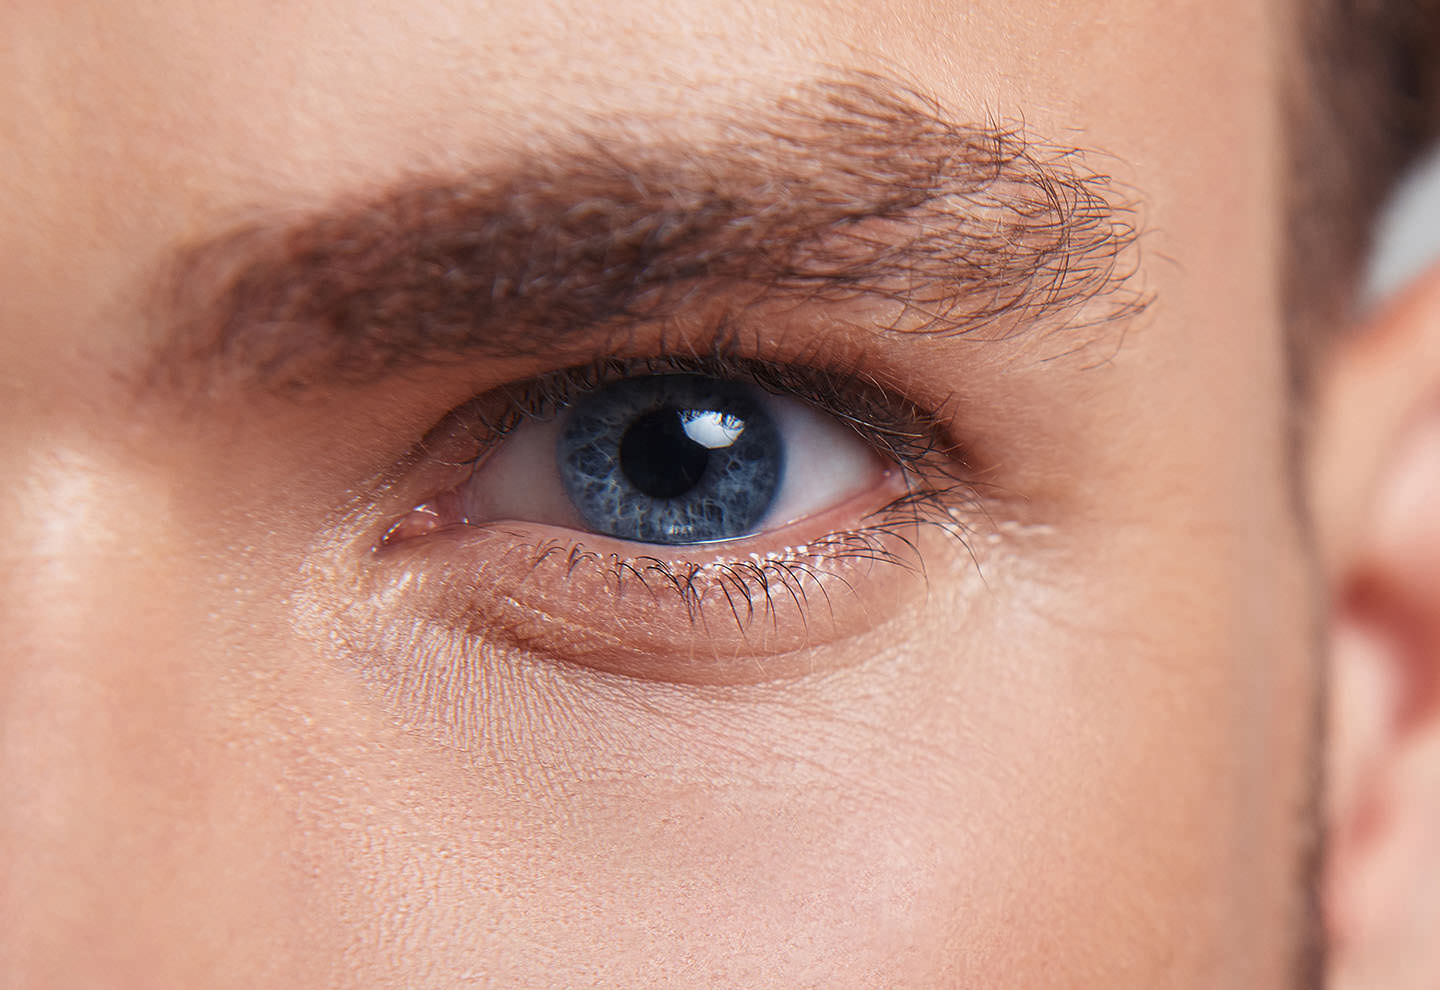 Think direct eye contact makes someone trustworthy? It can be a sign of something much darker